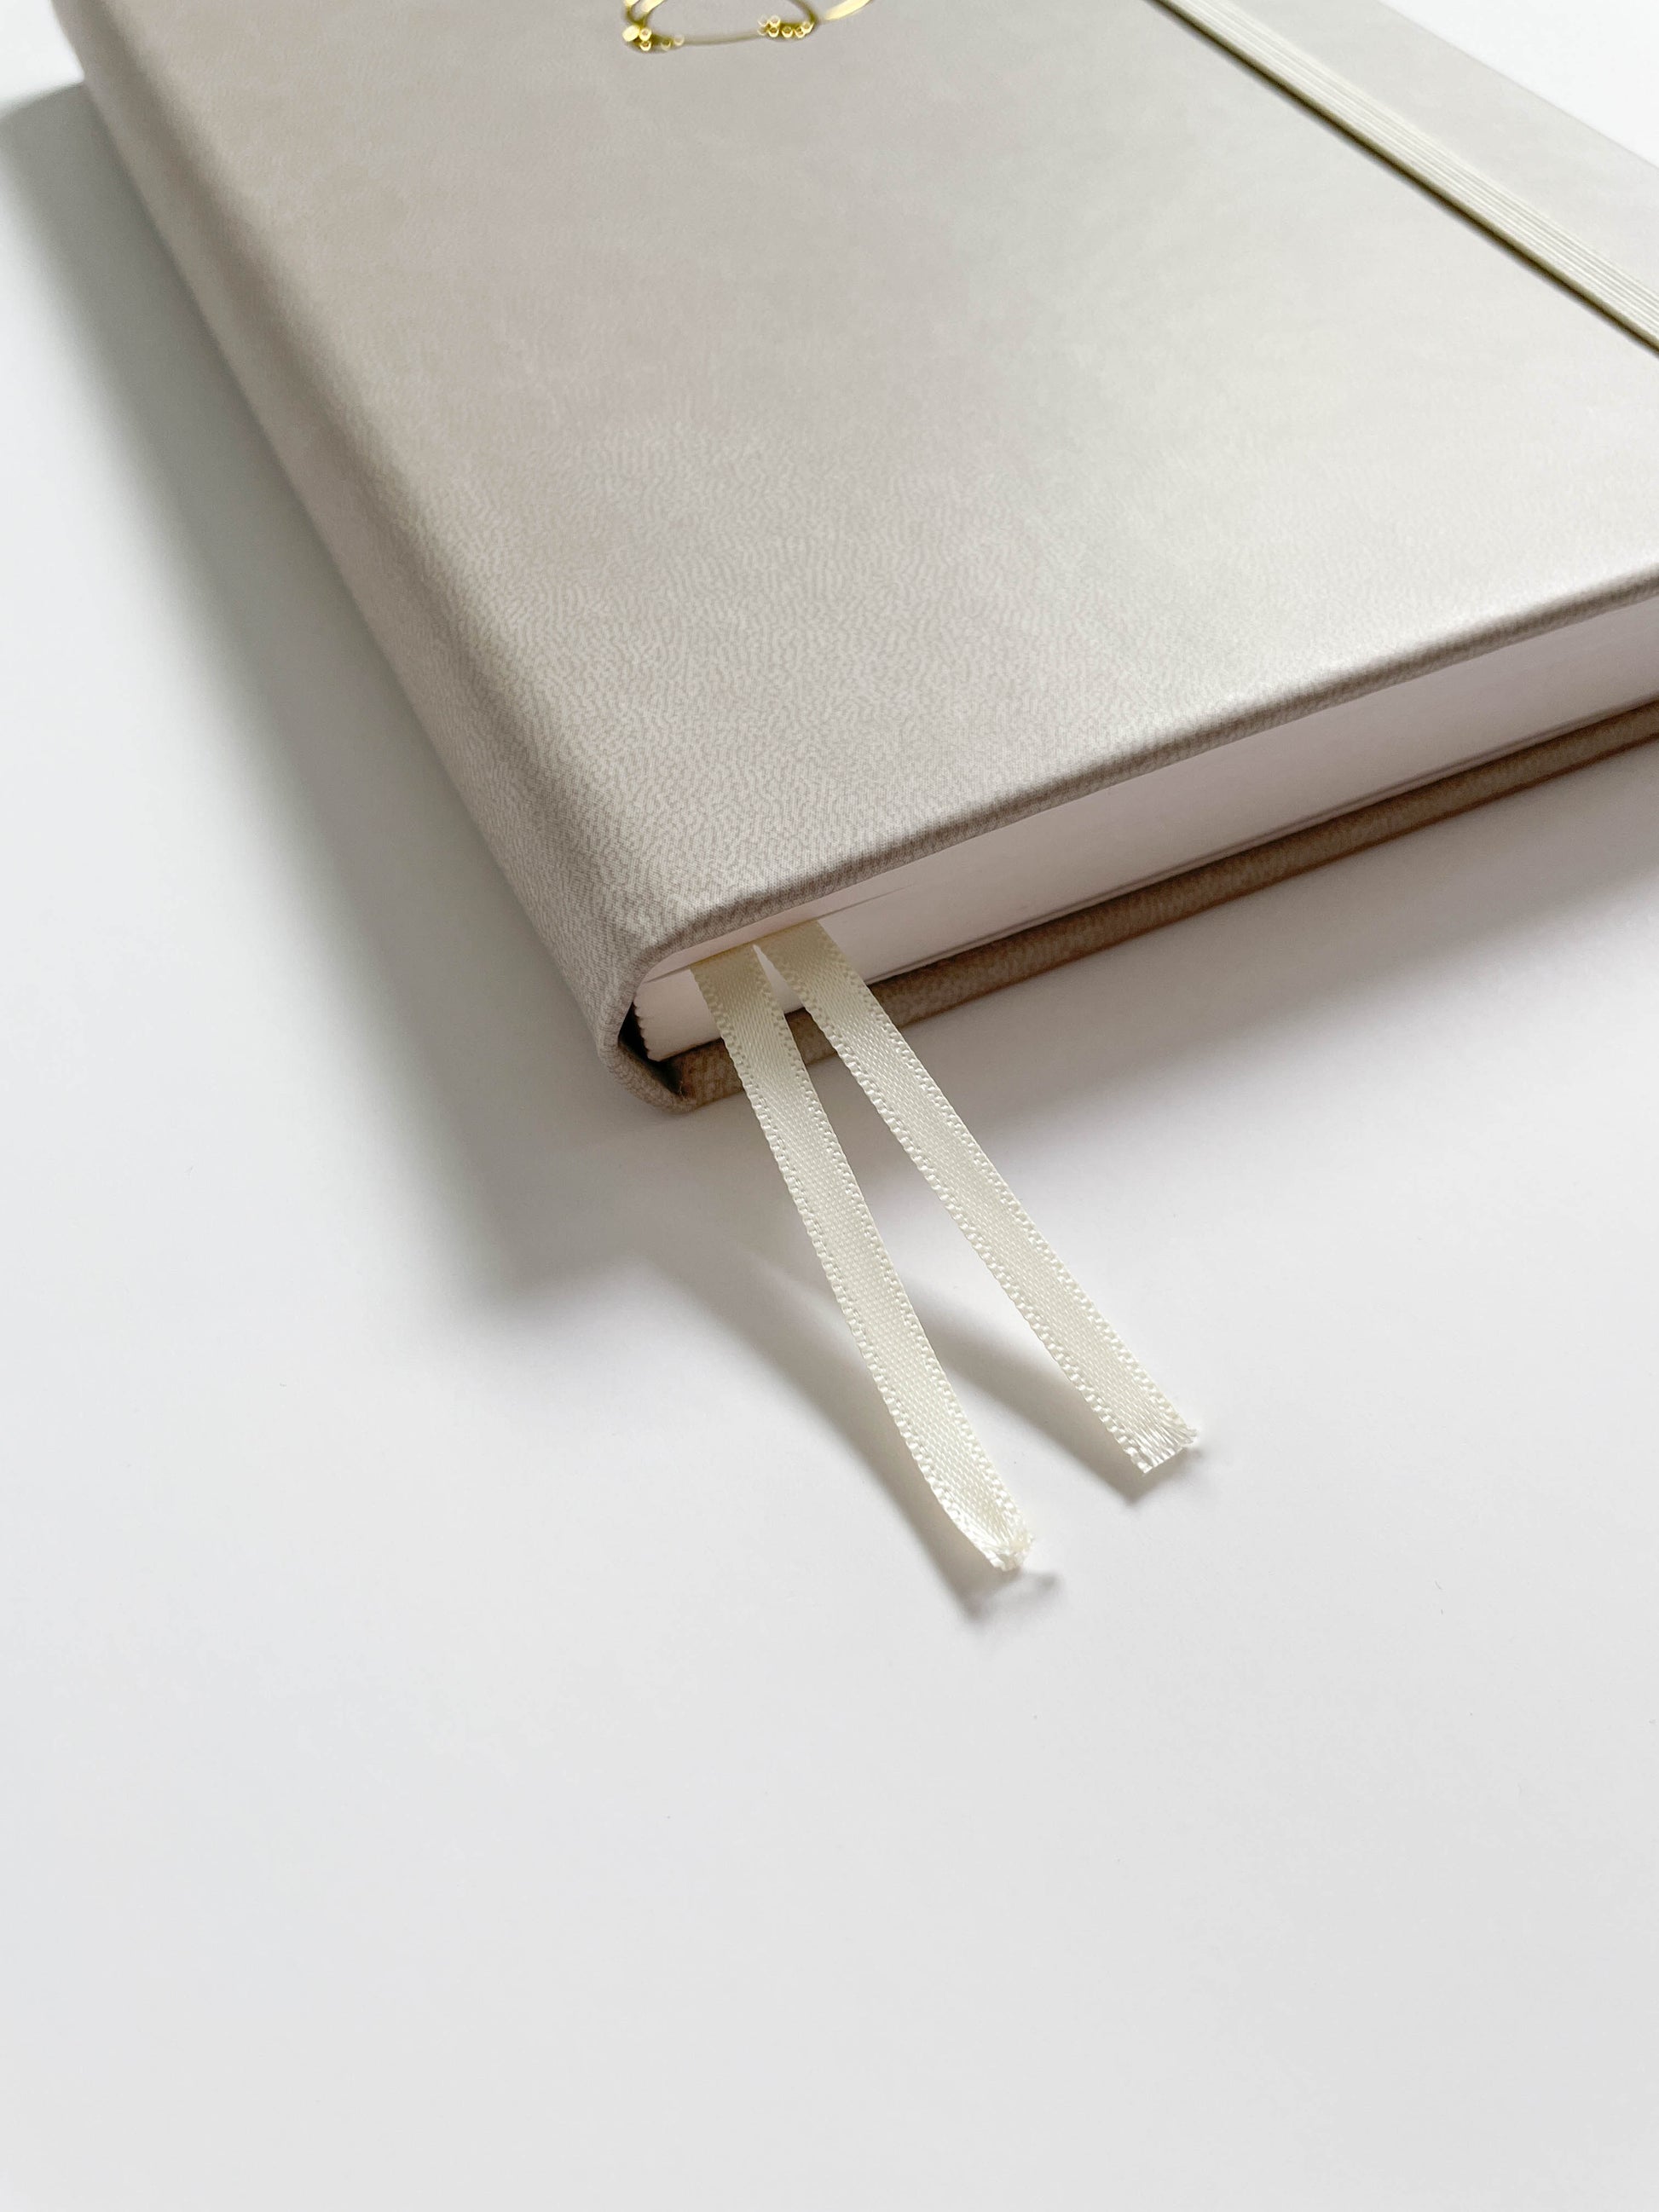 Bottom view of an ivory bullet journal that shows two white fabric bookmarks.